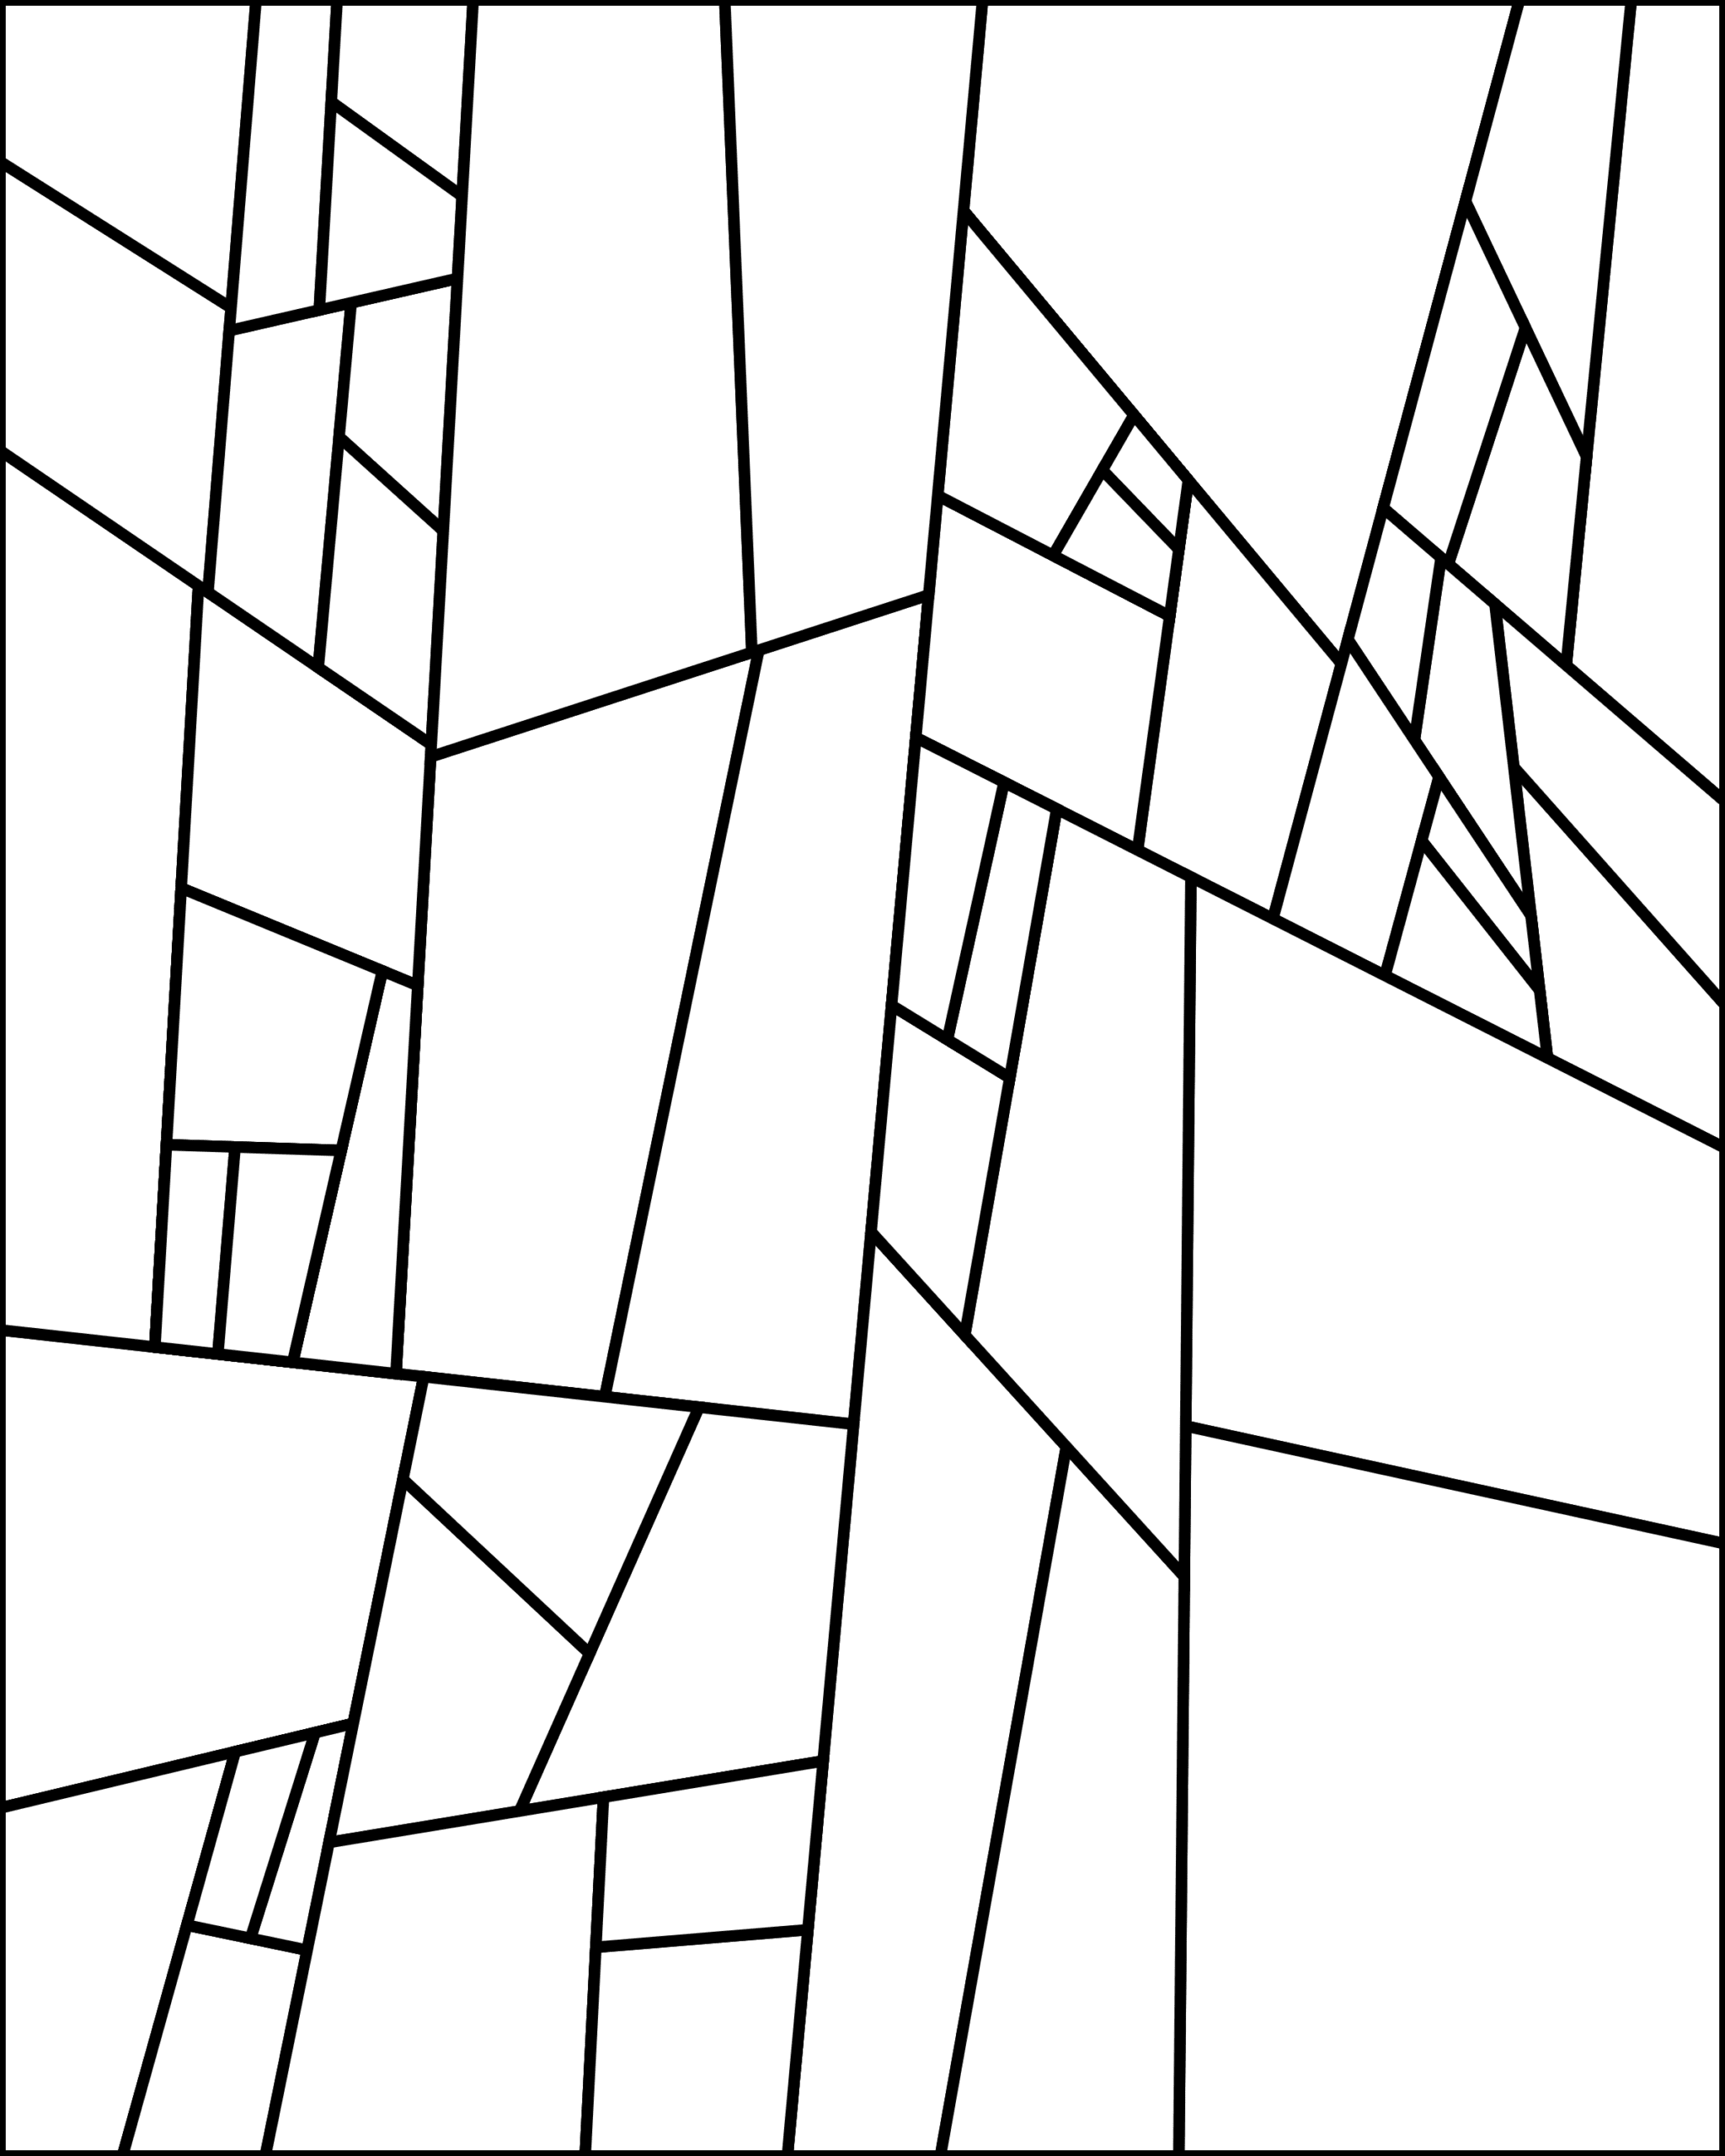 Shattered Glass - Coloring Pages Generator